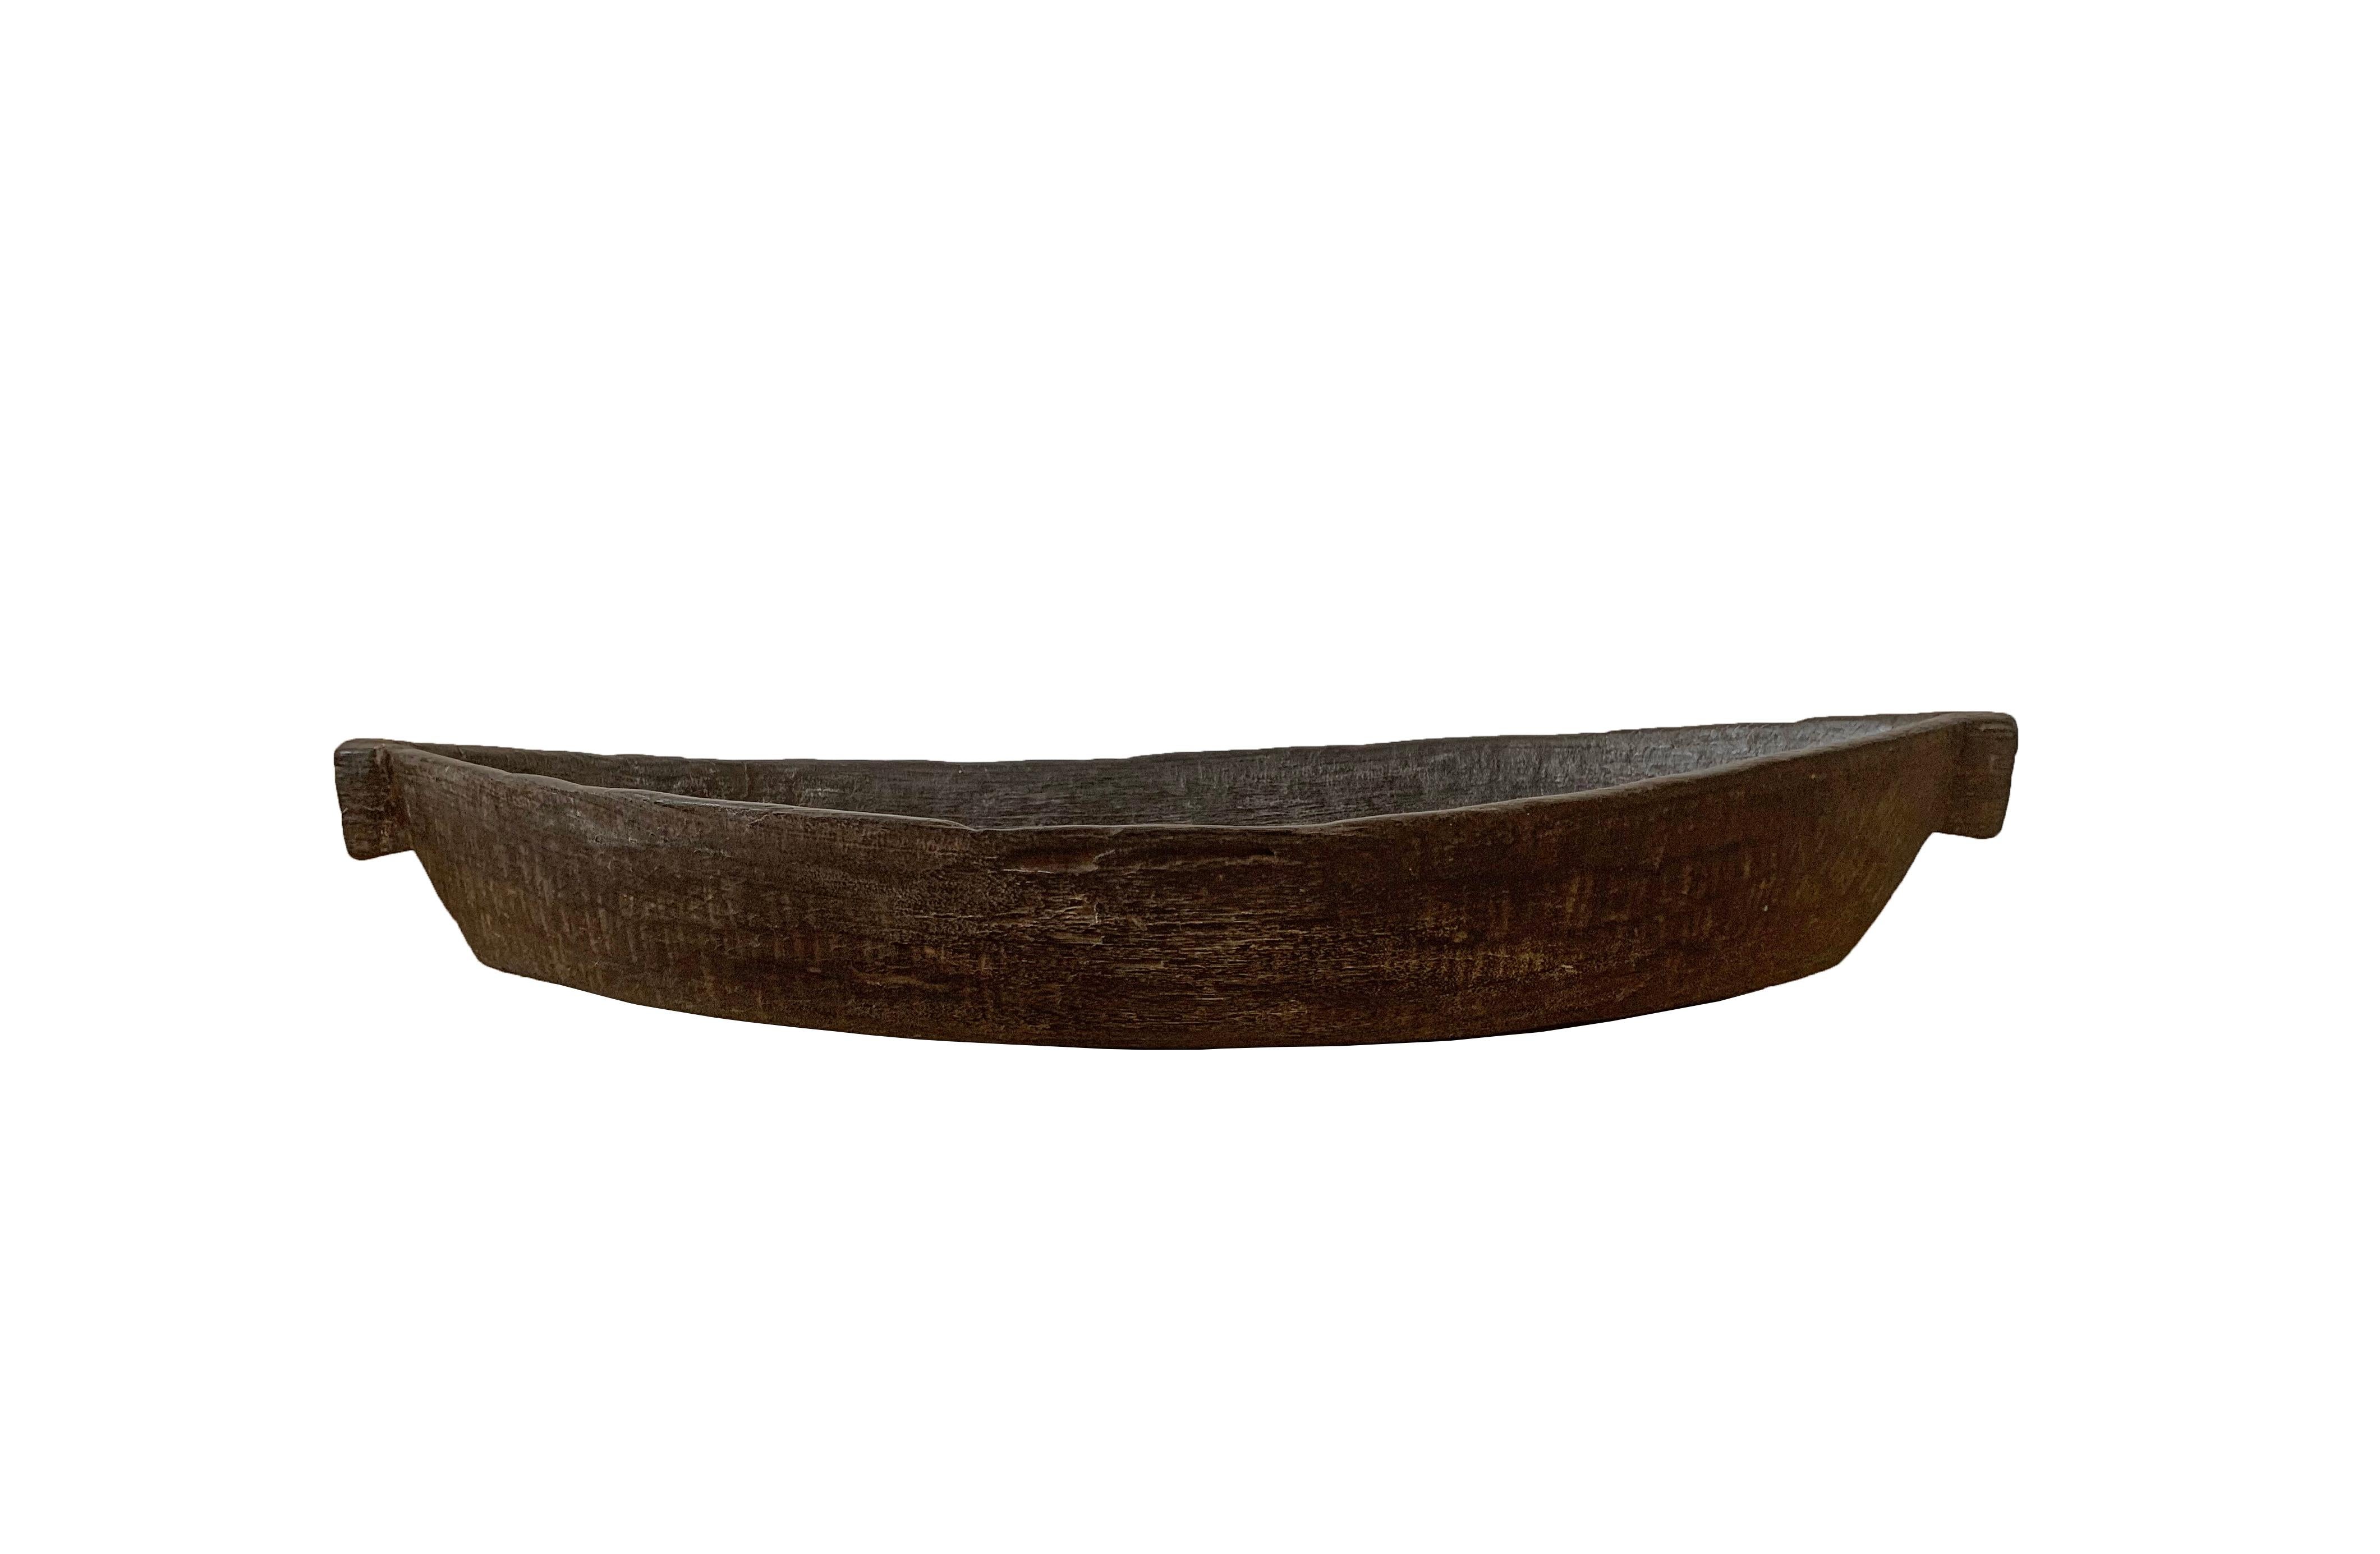 This hand-carved tray comes from the Mentawai tribe found on the Mentawai Islands off the west coast, Sumatra, Indonesia. It is hand-carved from a single block of wood. These trays are sought after for their beautiful elongated shape. Trays such as